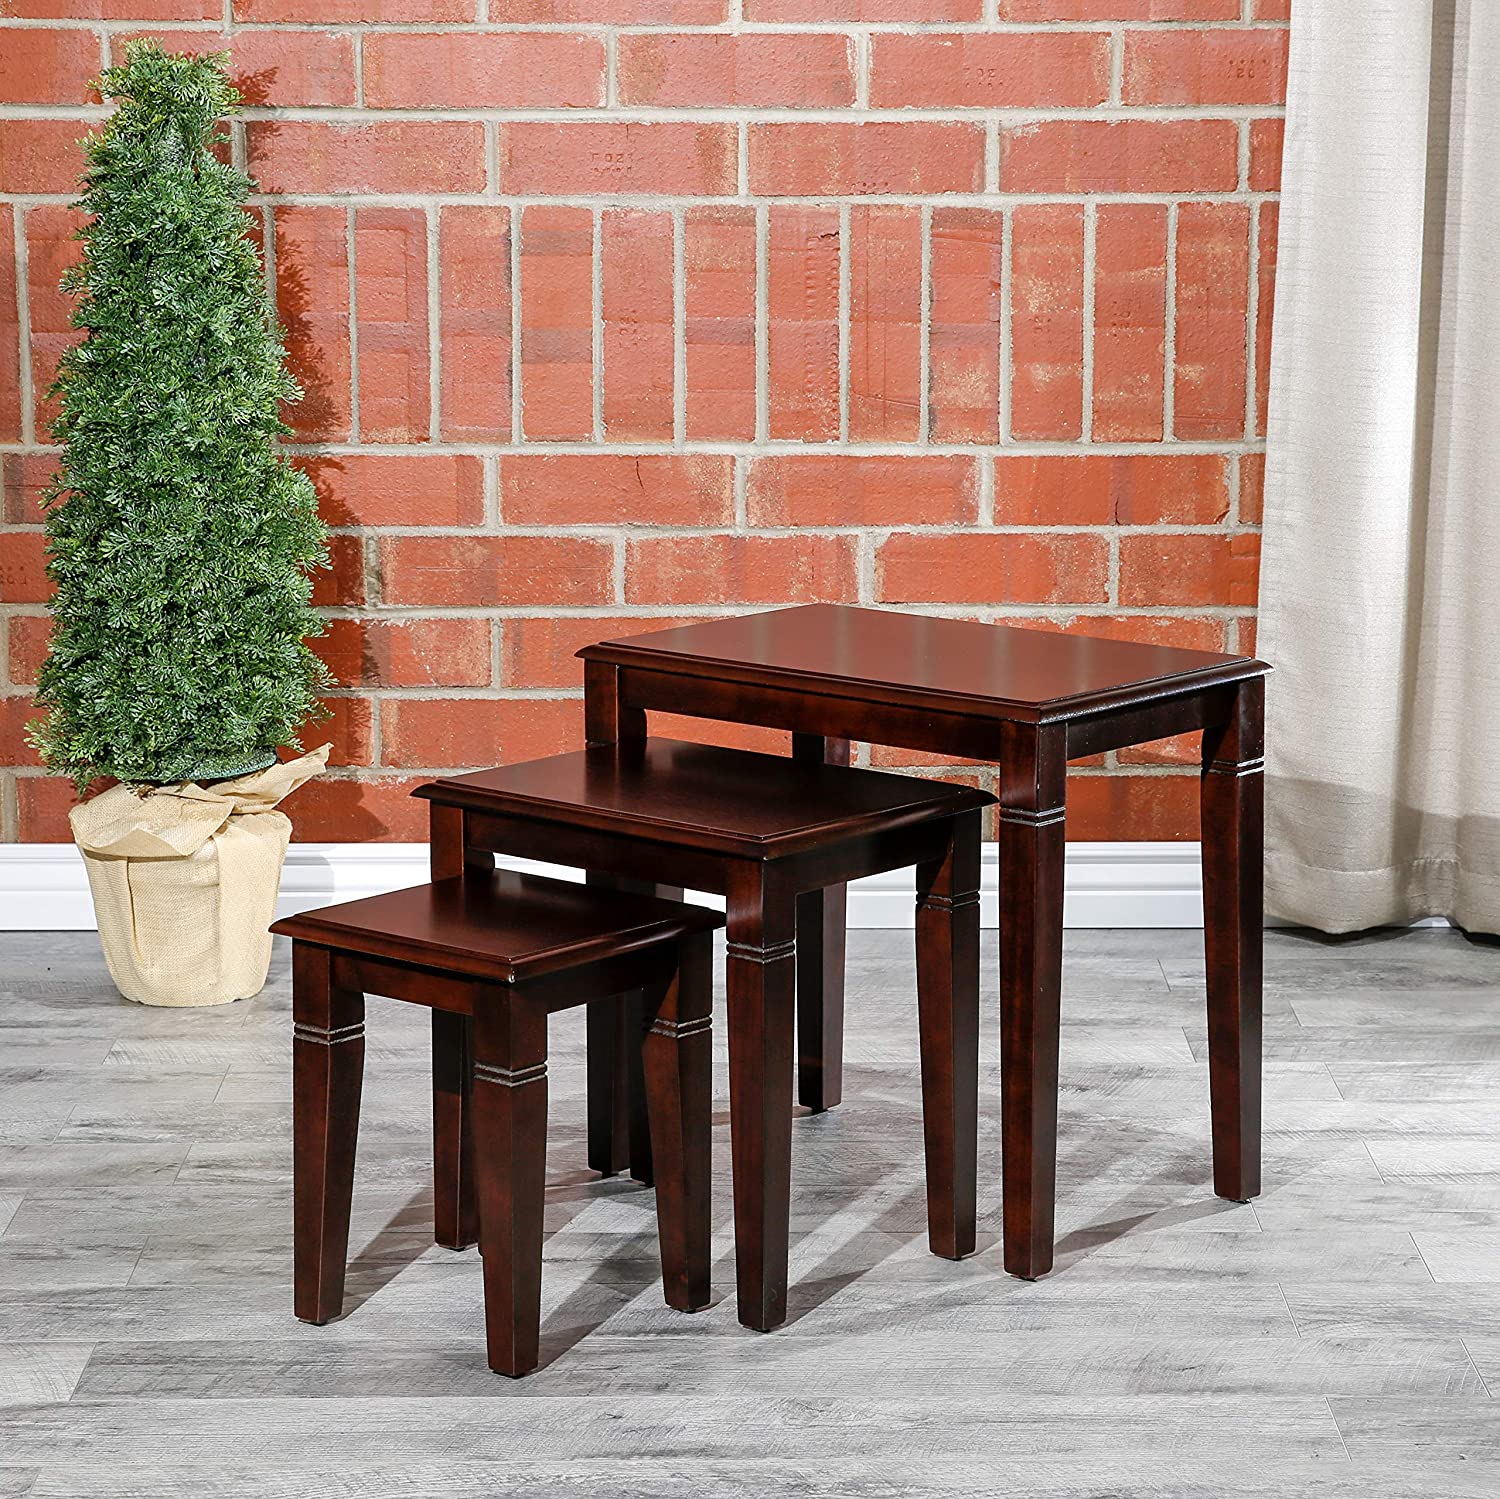 Nest Of Tables : 3 Piece Nesting Tables DTY Indoor Living Furniture